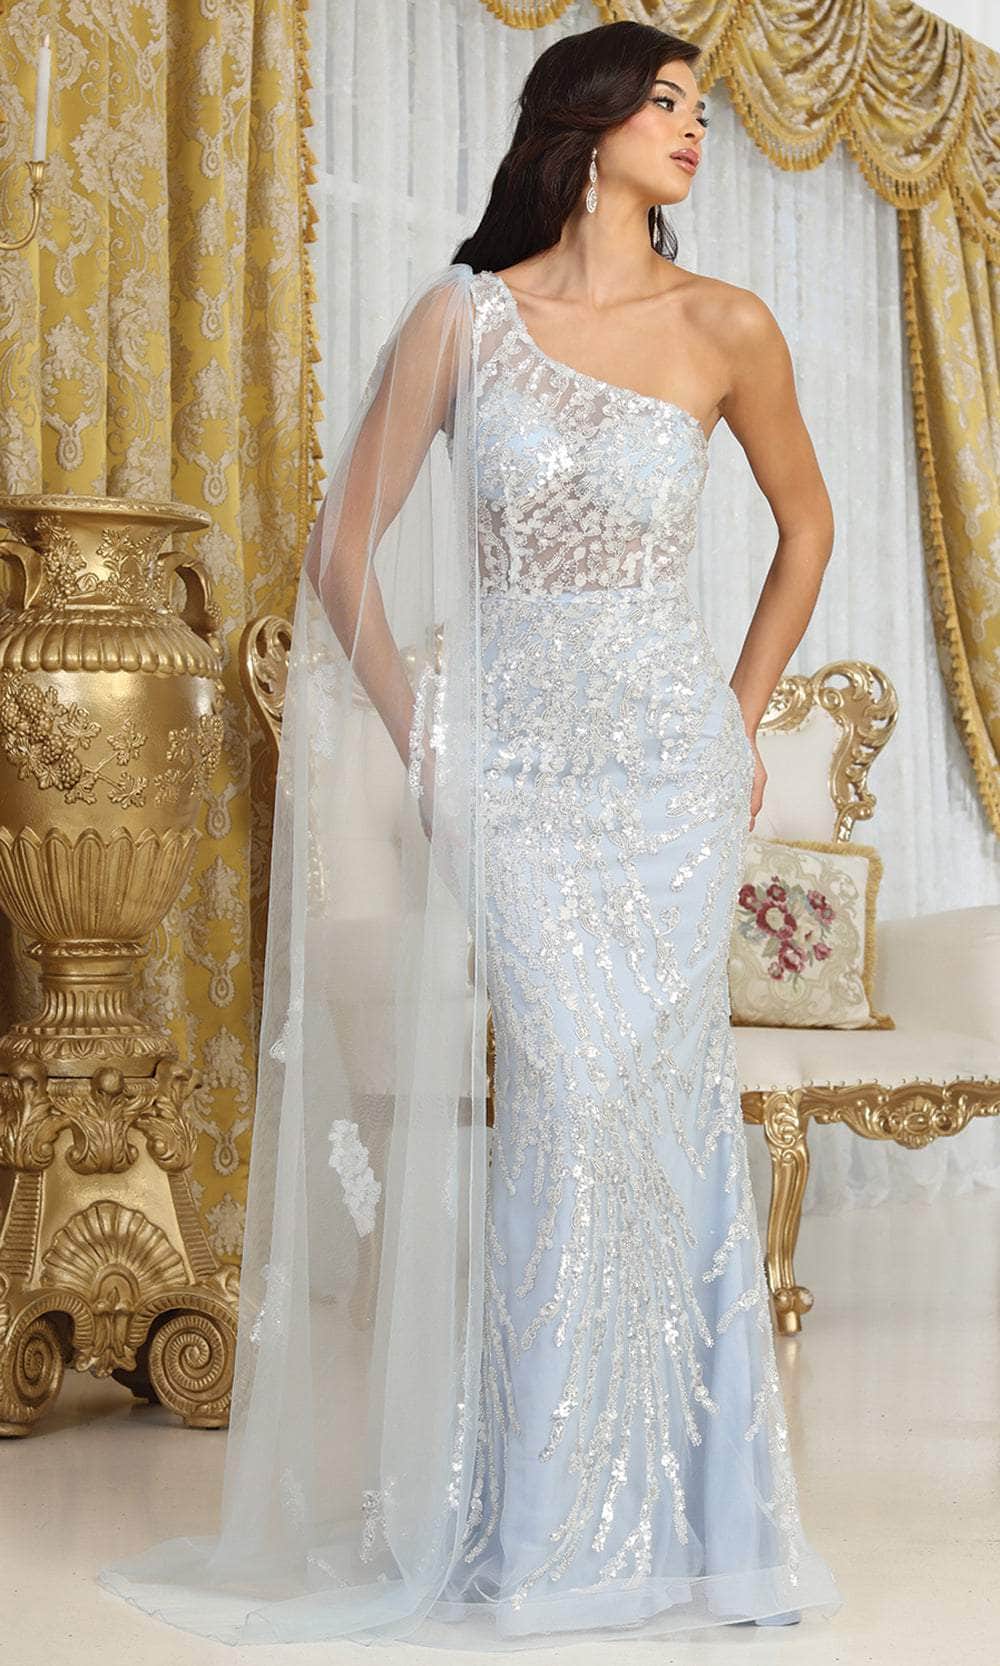 May Queen RQ8075 - Asymmetric Beaded Prom Gown with Cape Evening Dresses 4 / Sky-Blue